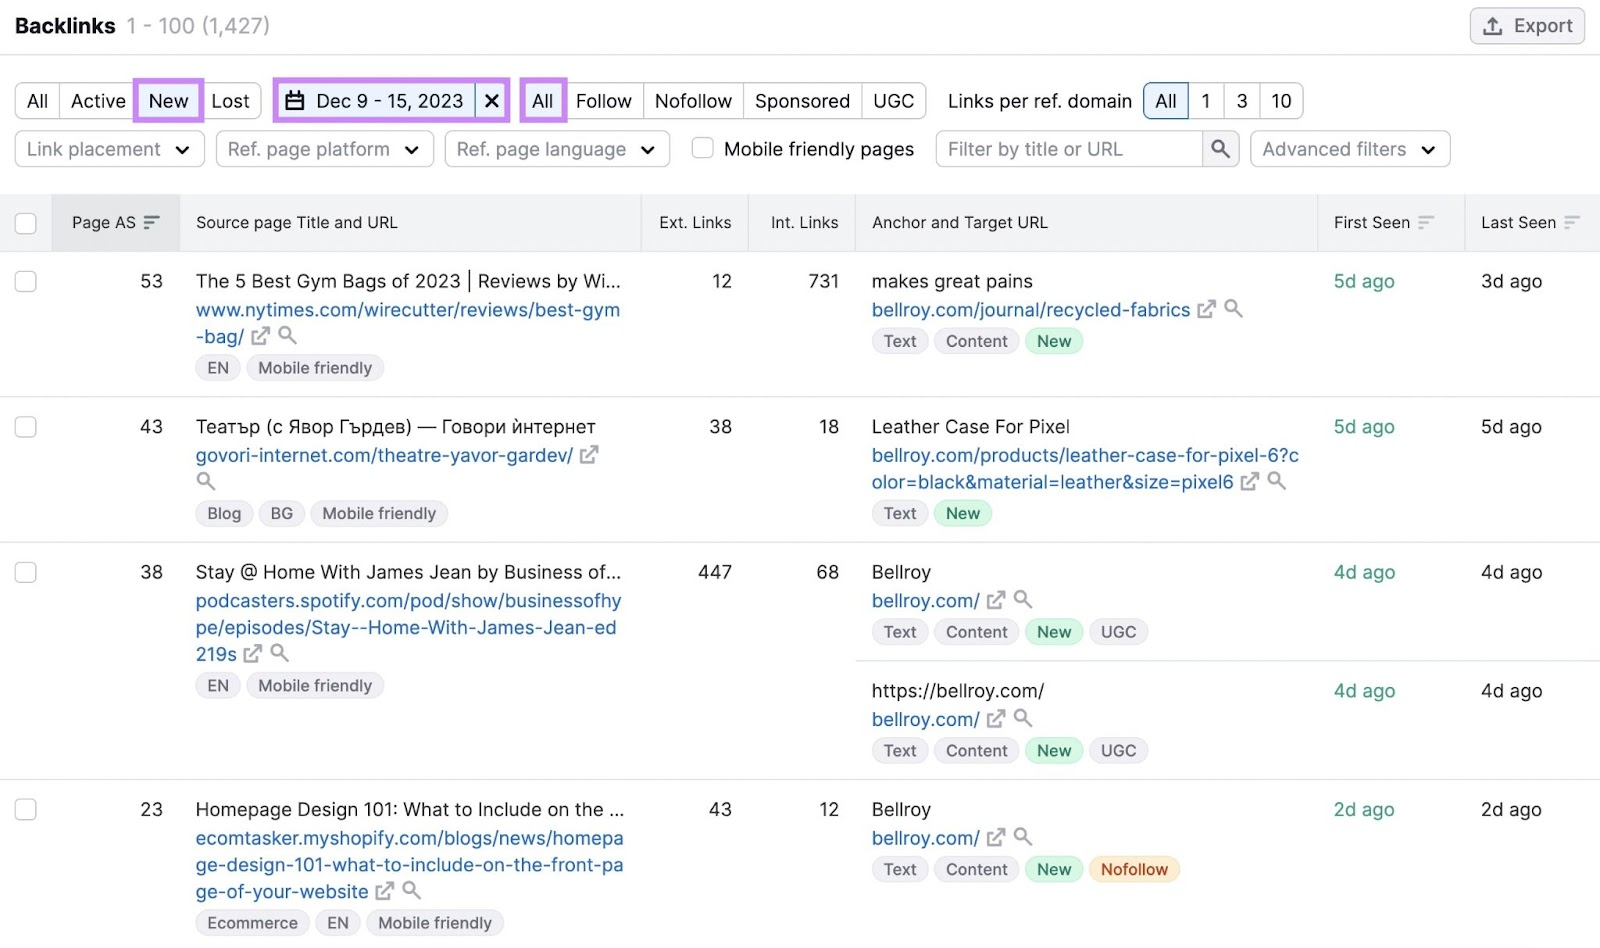 New backlinks dashboard for Dec 9 - 15, 2023 shown in Backlink Analytics tool